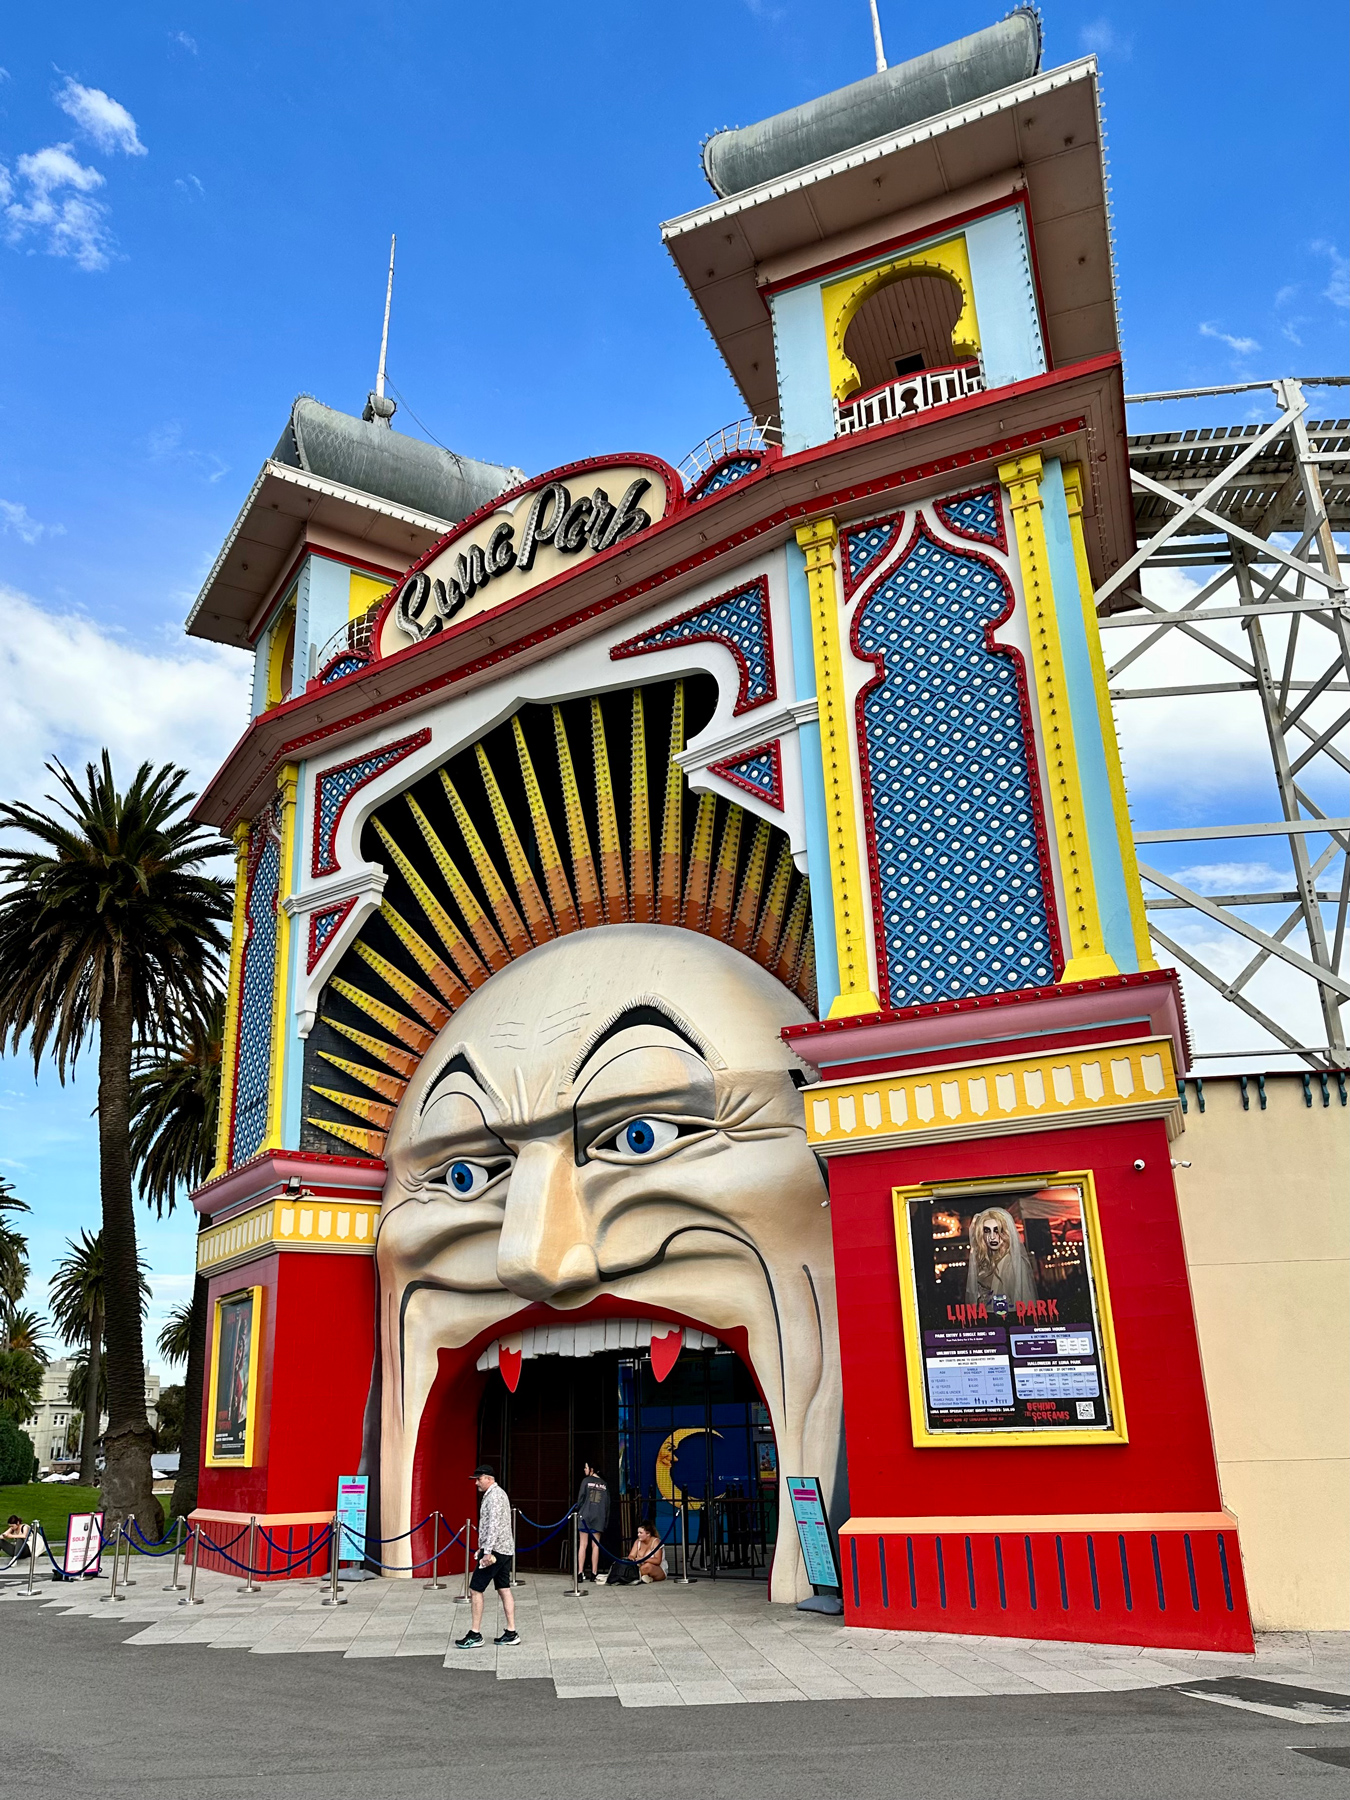 The entrance to Luna Park which is a large creepy-looking face, you walk through the open mouth to enter